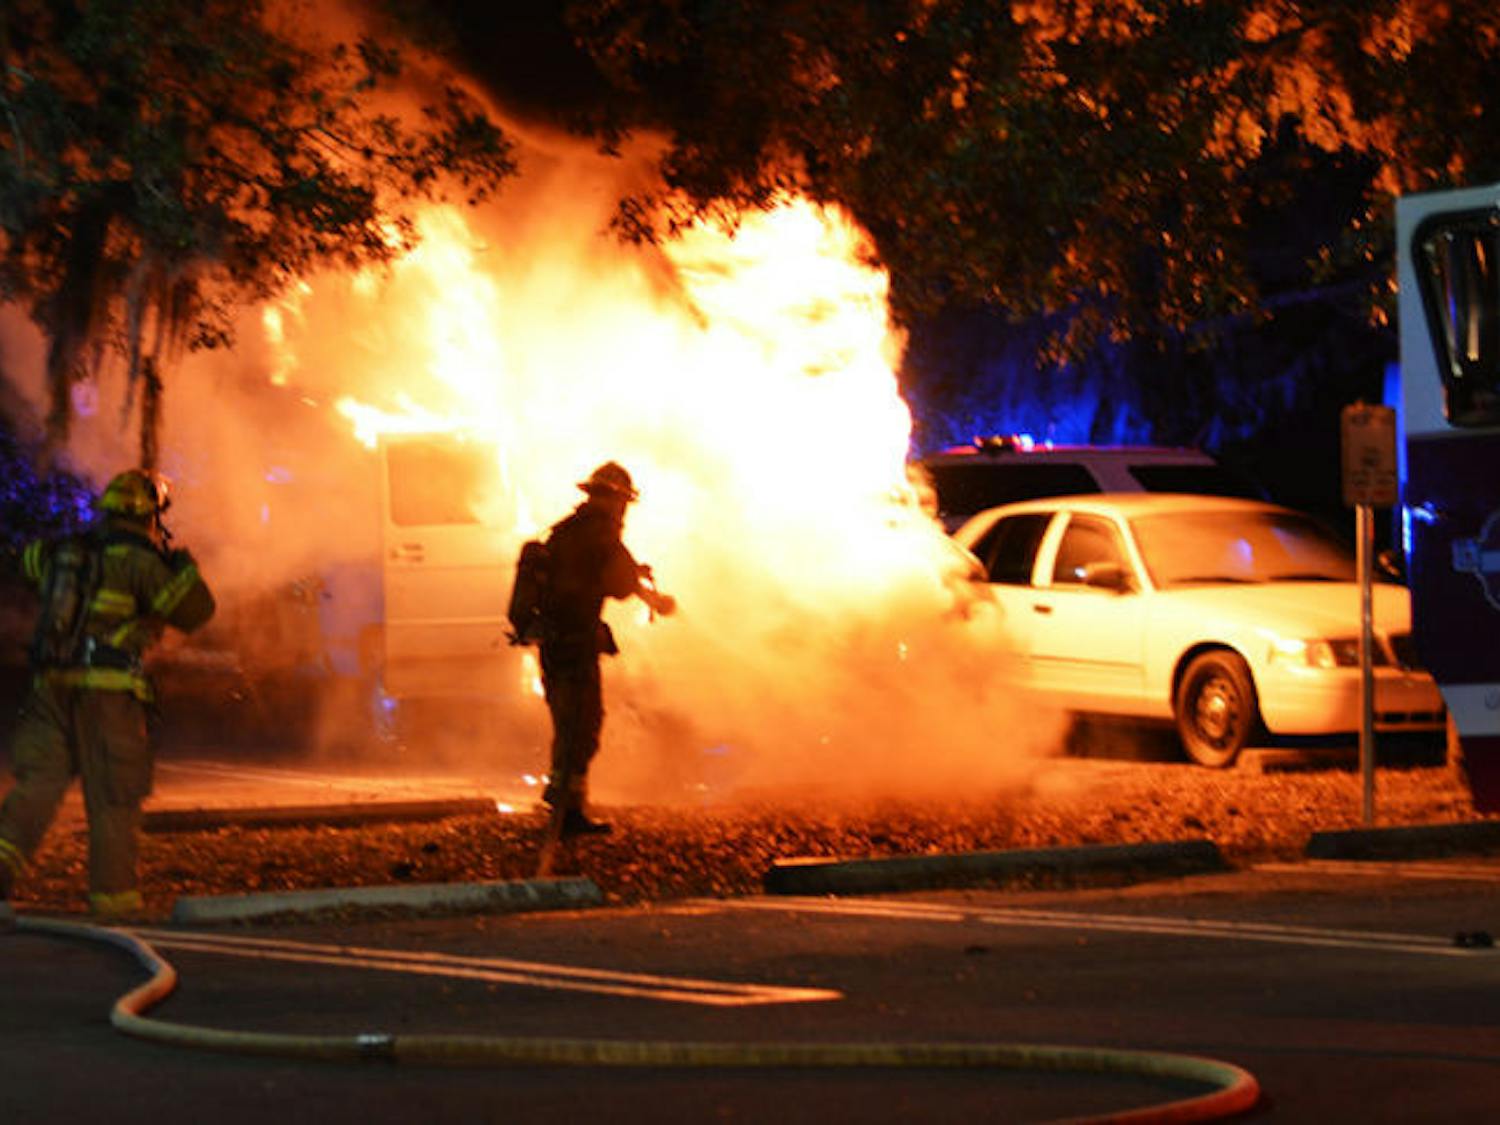 A UF utility van is engulfed in flames around 10 p.m. Friday on the UPD parking lot. Gainesville Fire Rescue rushed to the scene and extinguished the blaze in minutes.